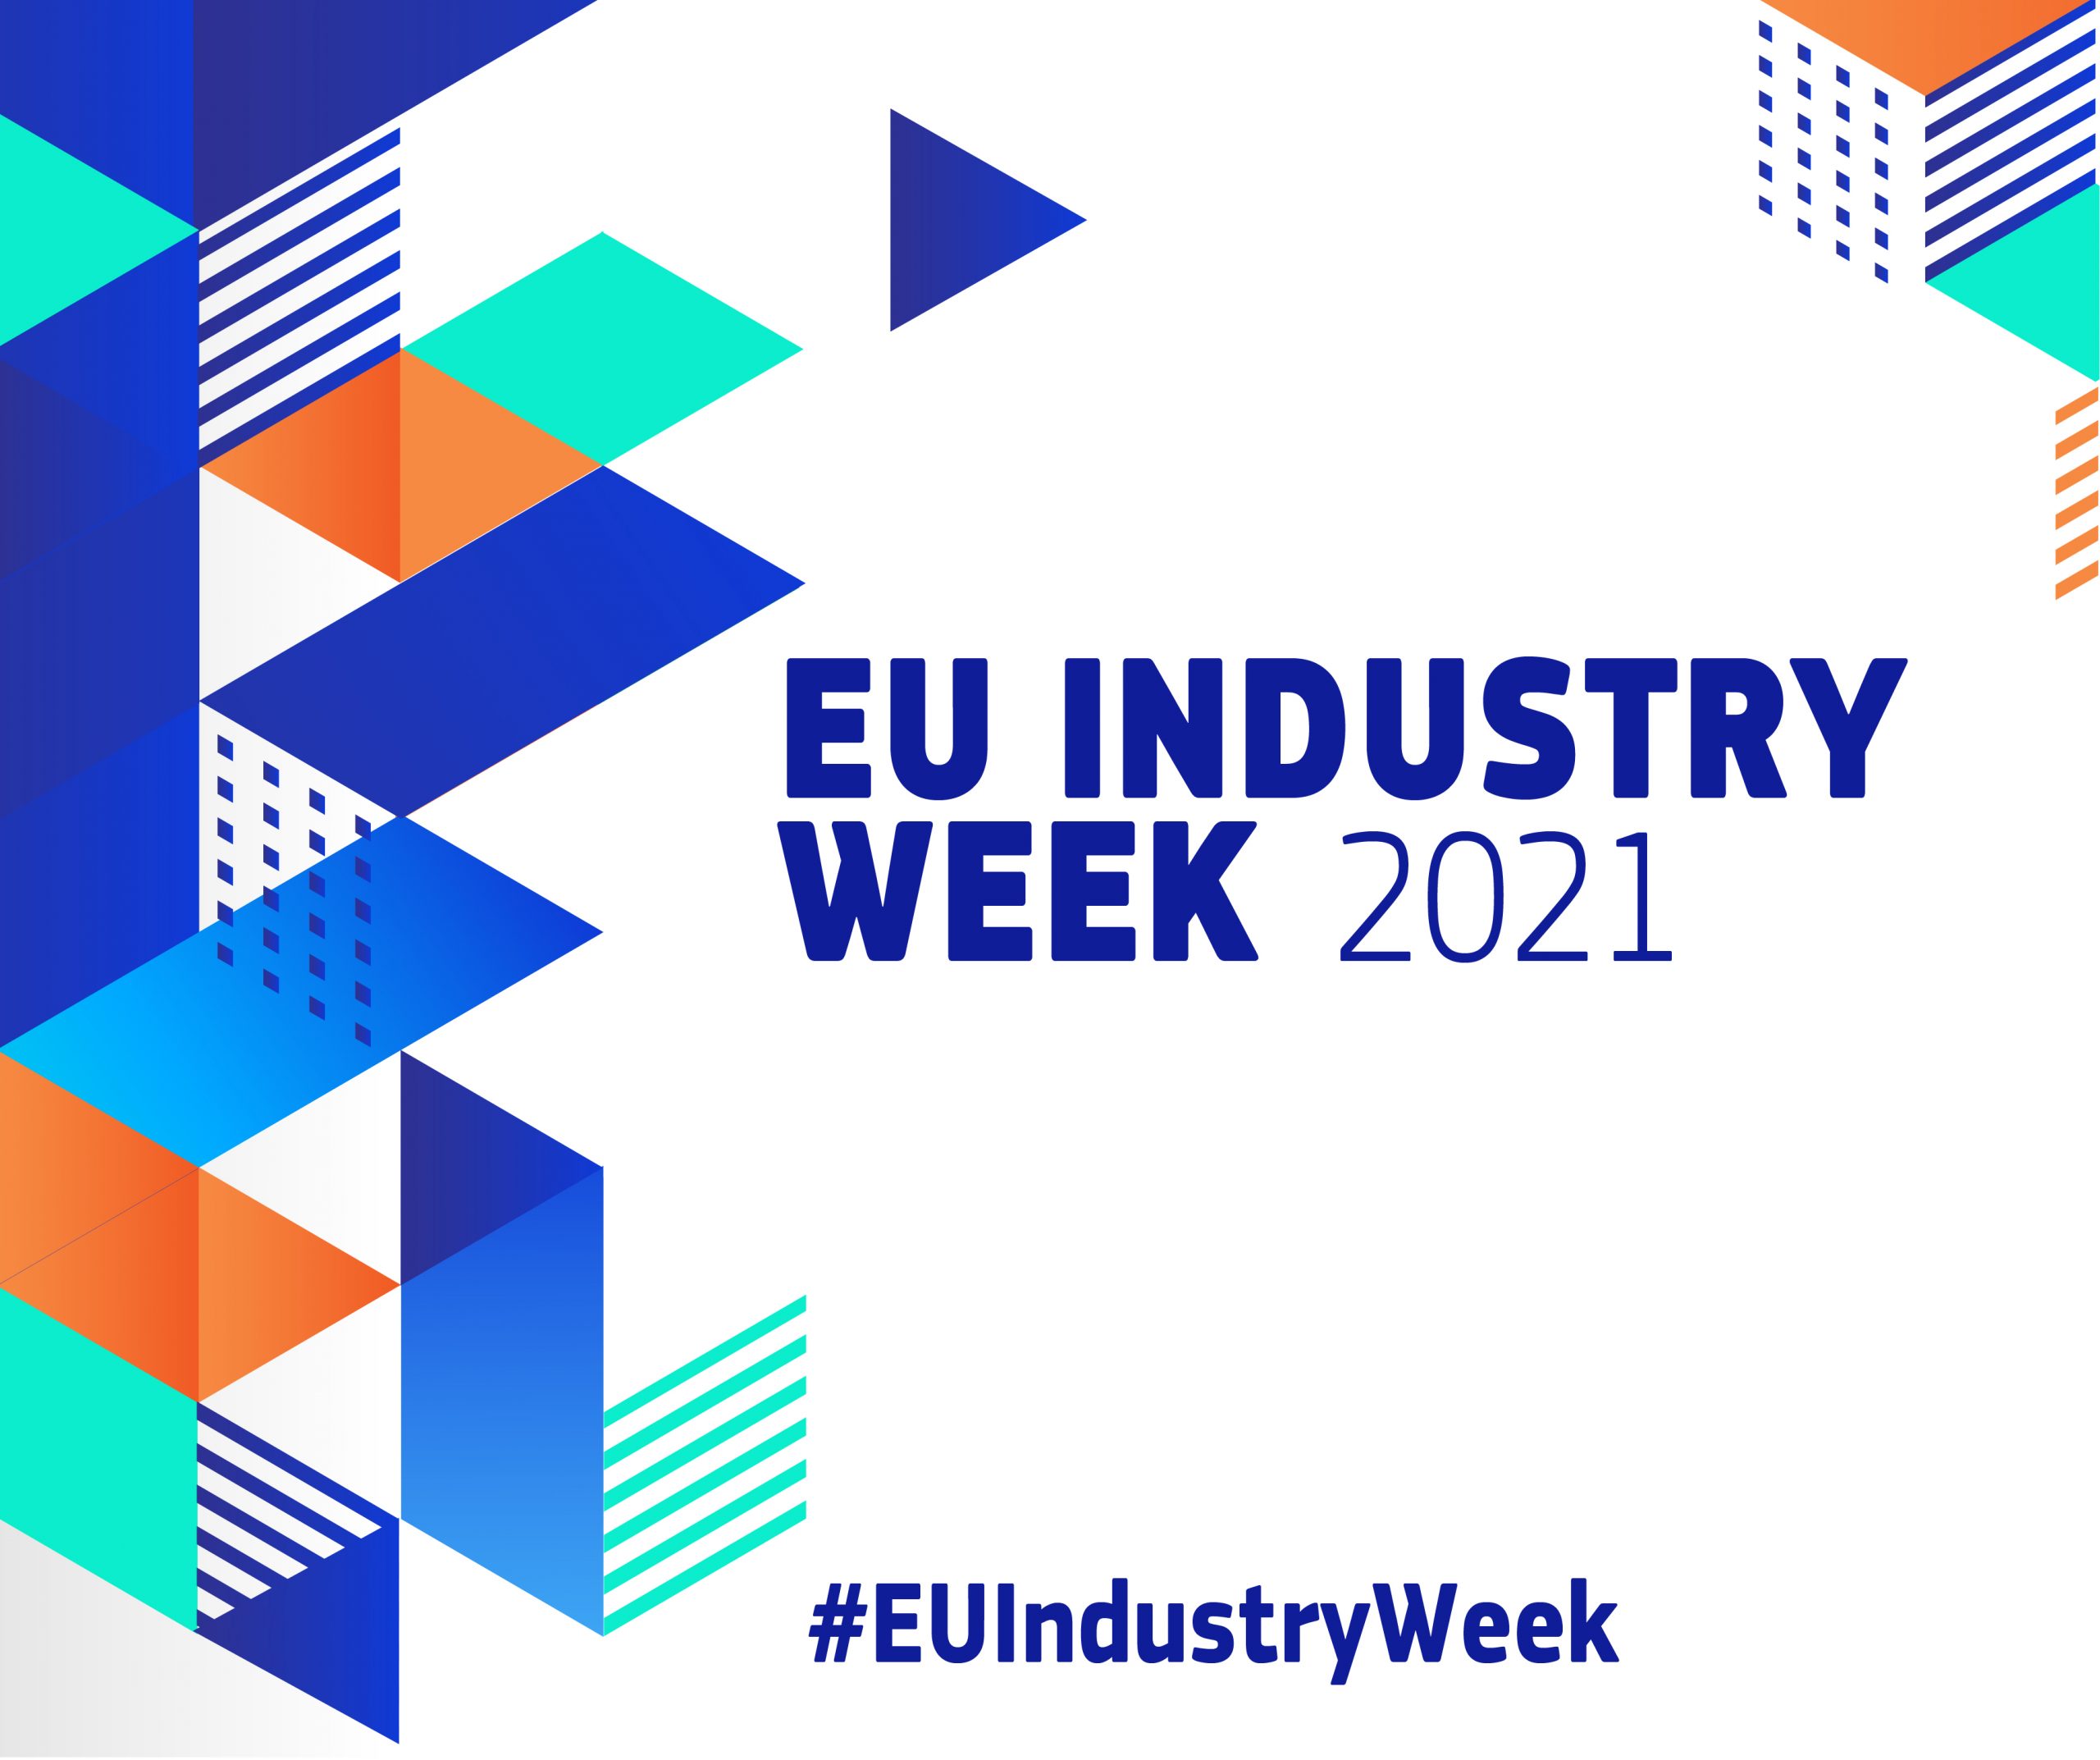 M-Sec has partnered with the EU Industry Week 2021 to help shape Europe’s digital future